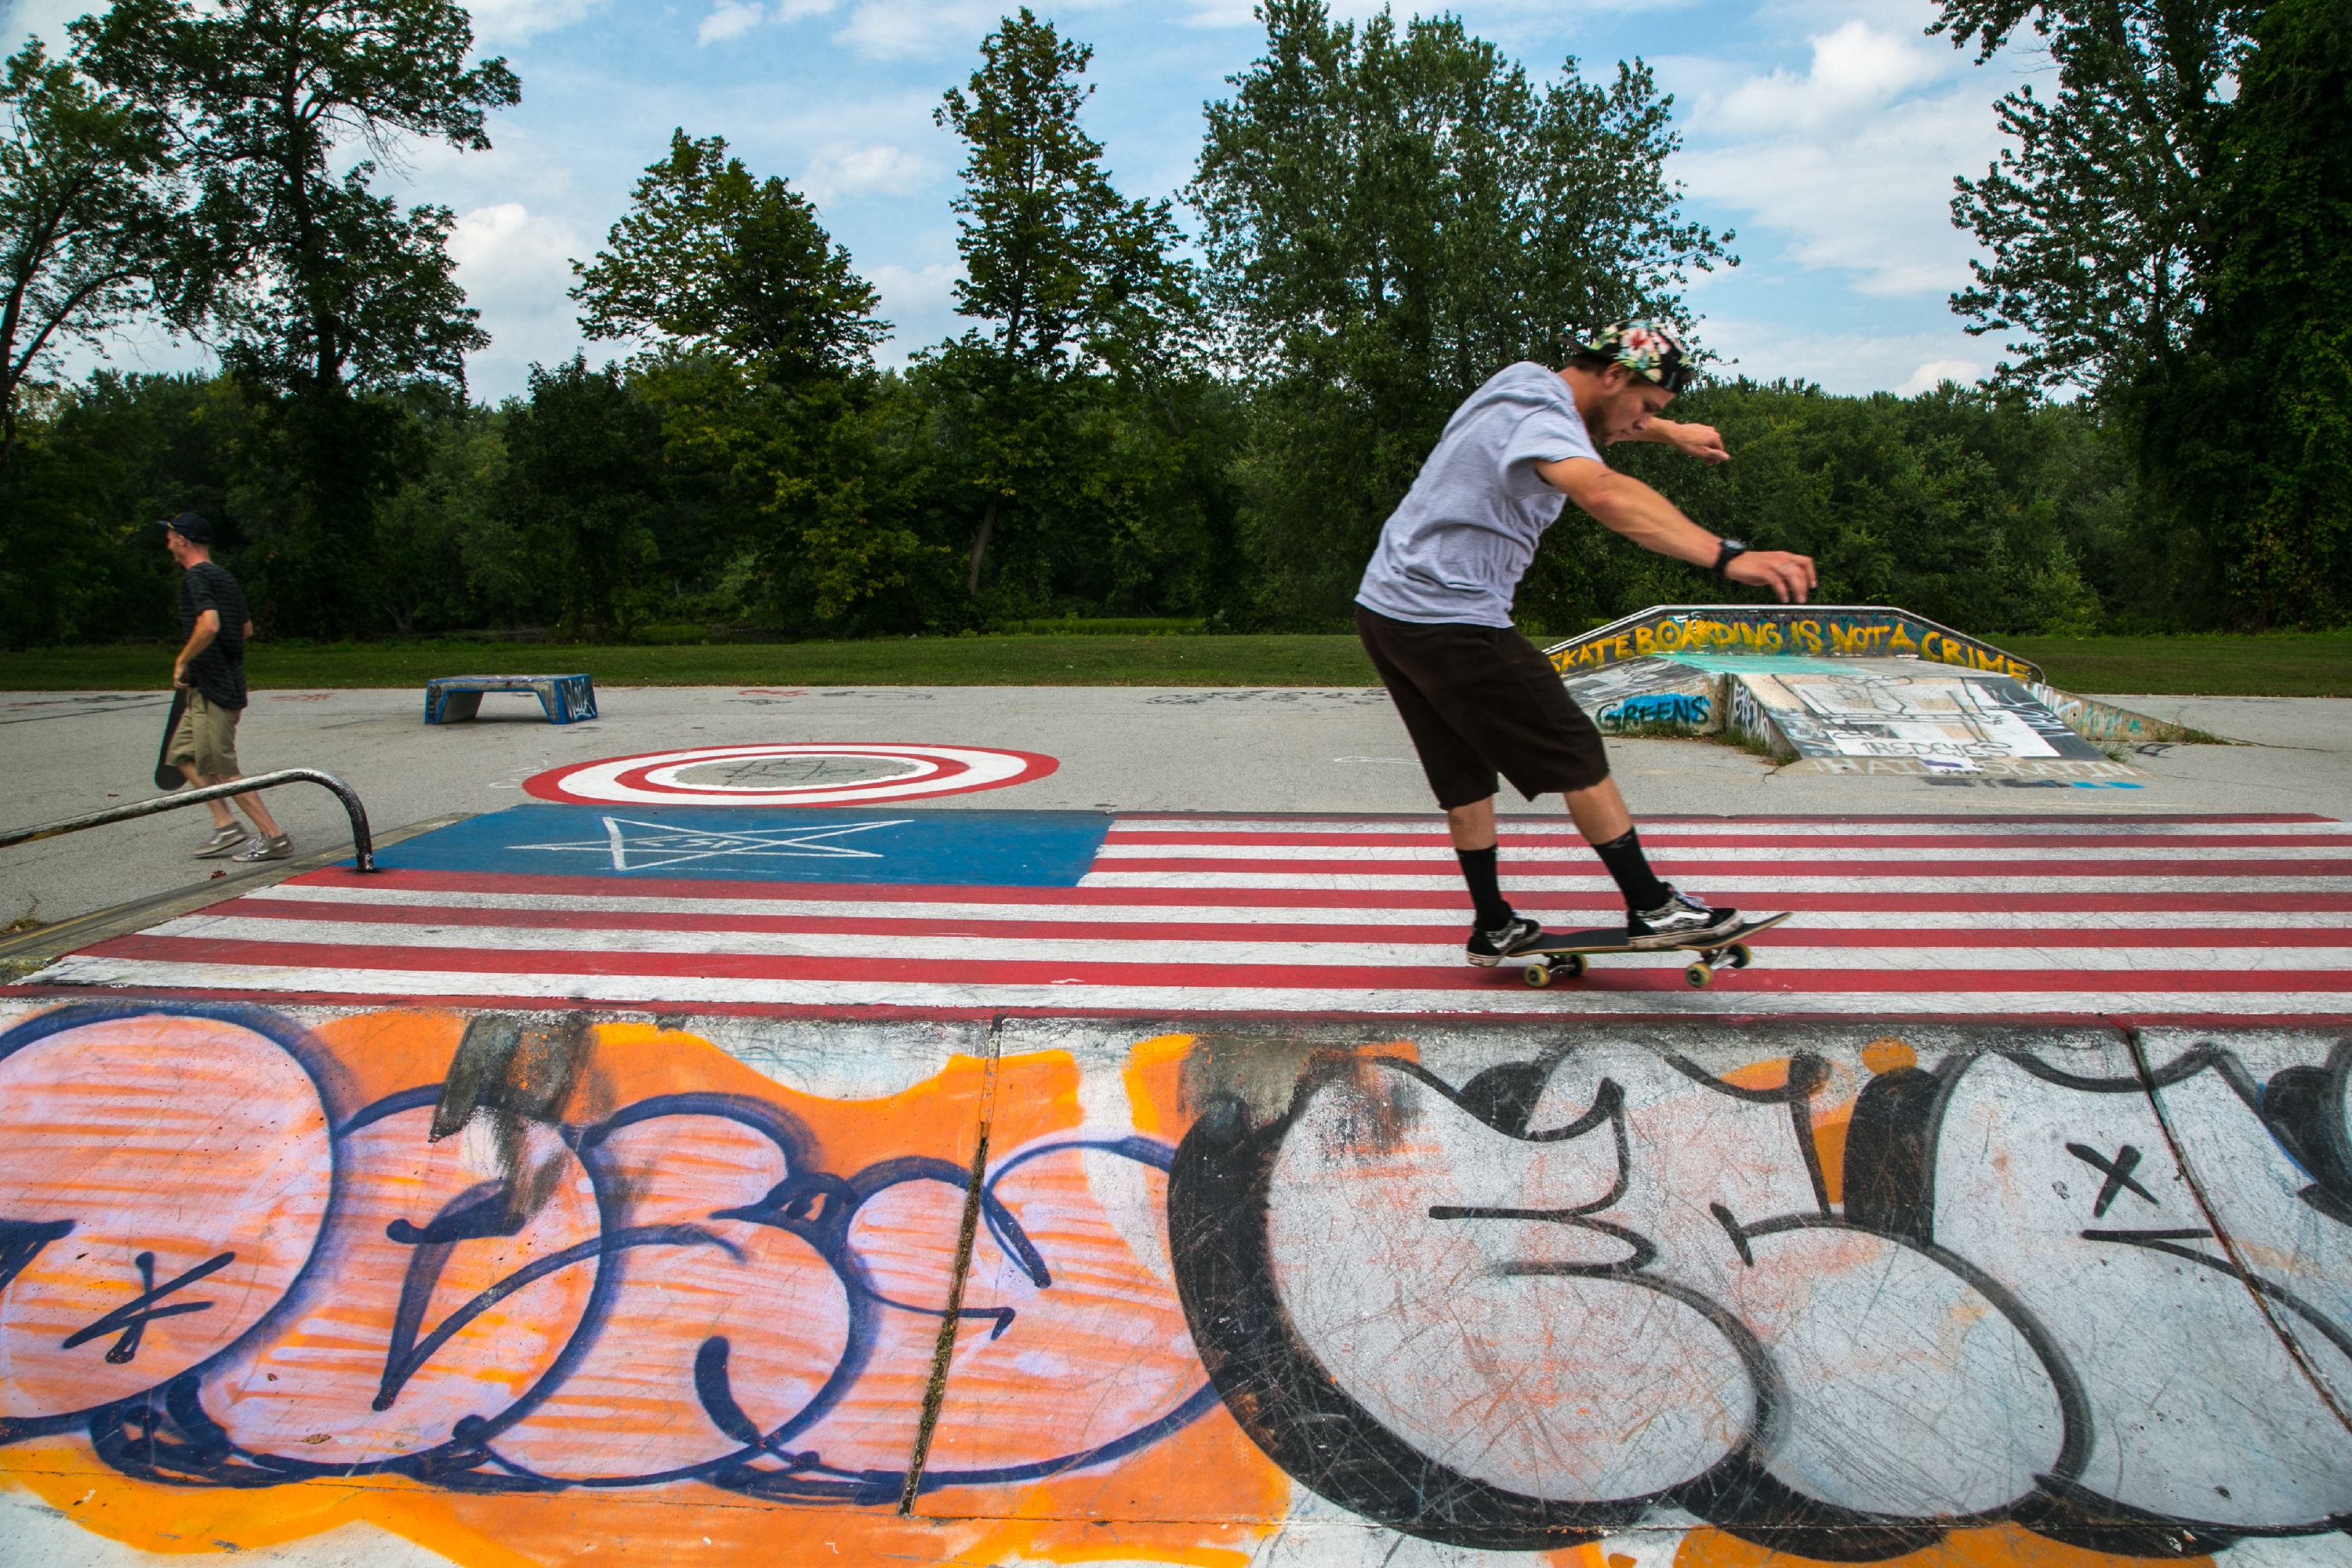 Tyler Castrogiovanni practices a jump at the Concord Skateboarding Park on Loudon Road last September.  GEOFF FORESTER